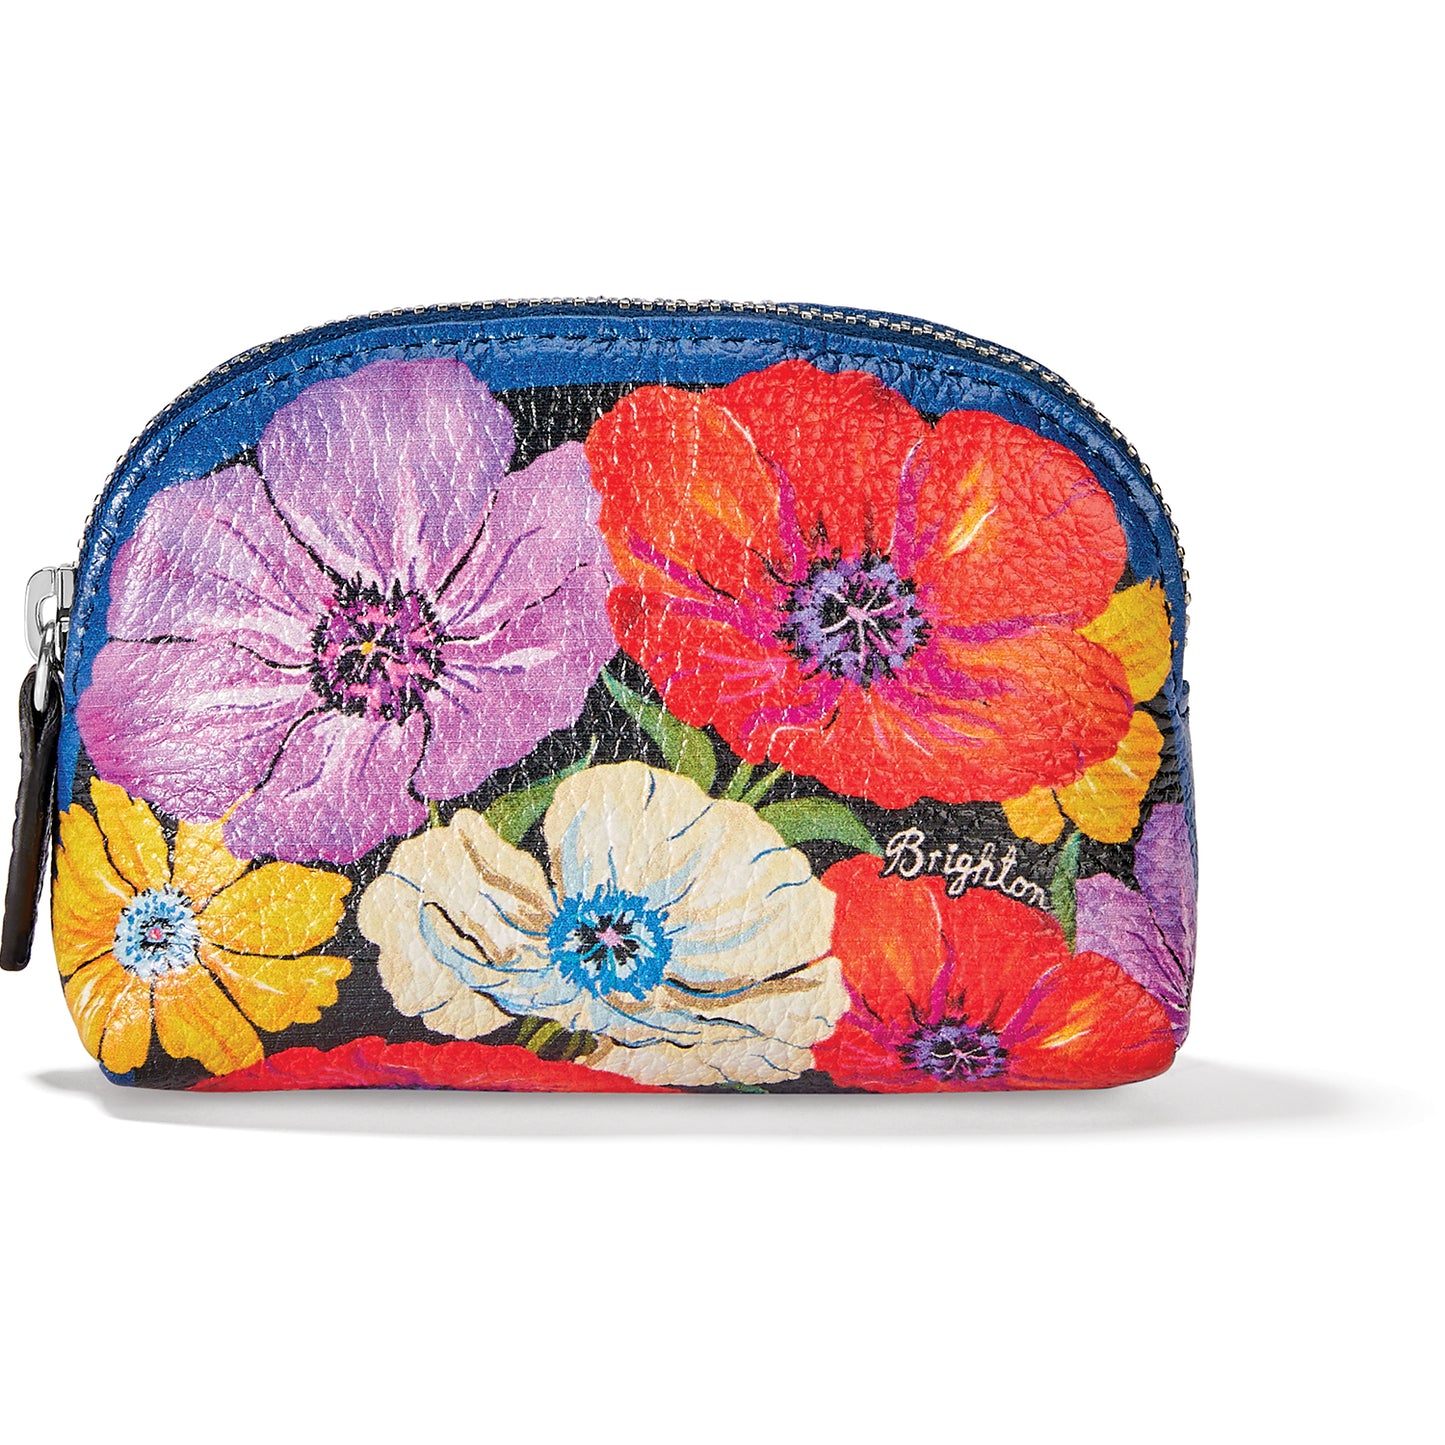 Painted Poppies Mini Coin Purse